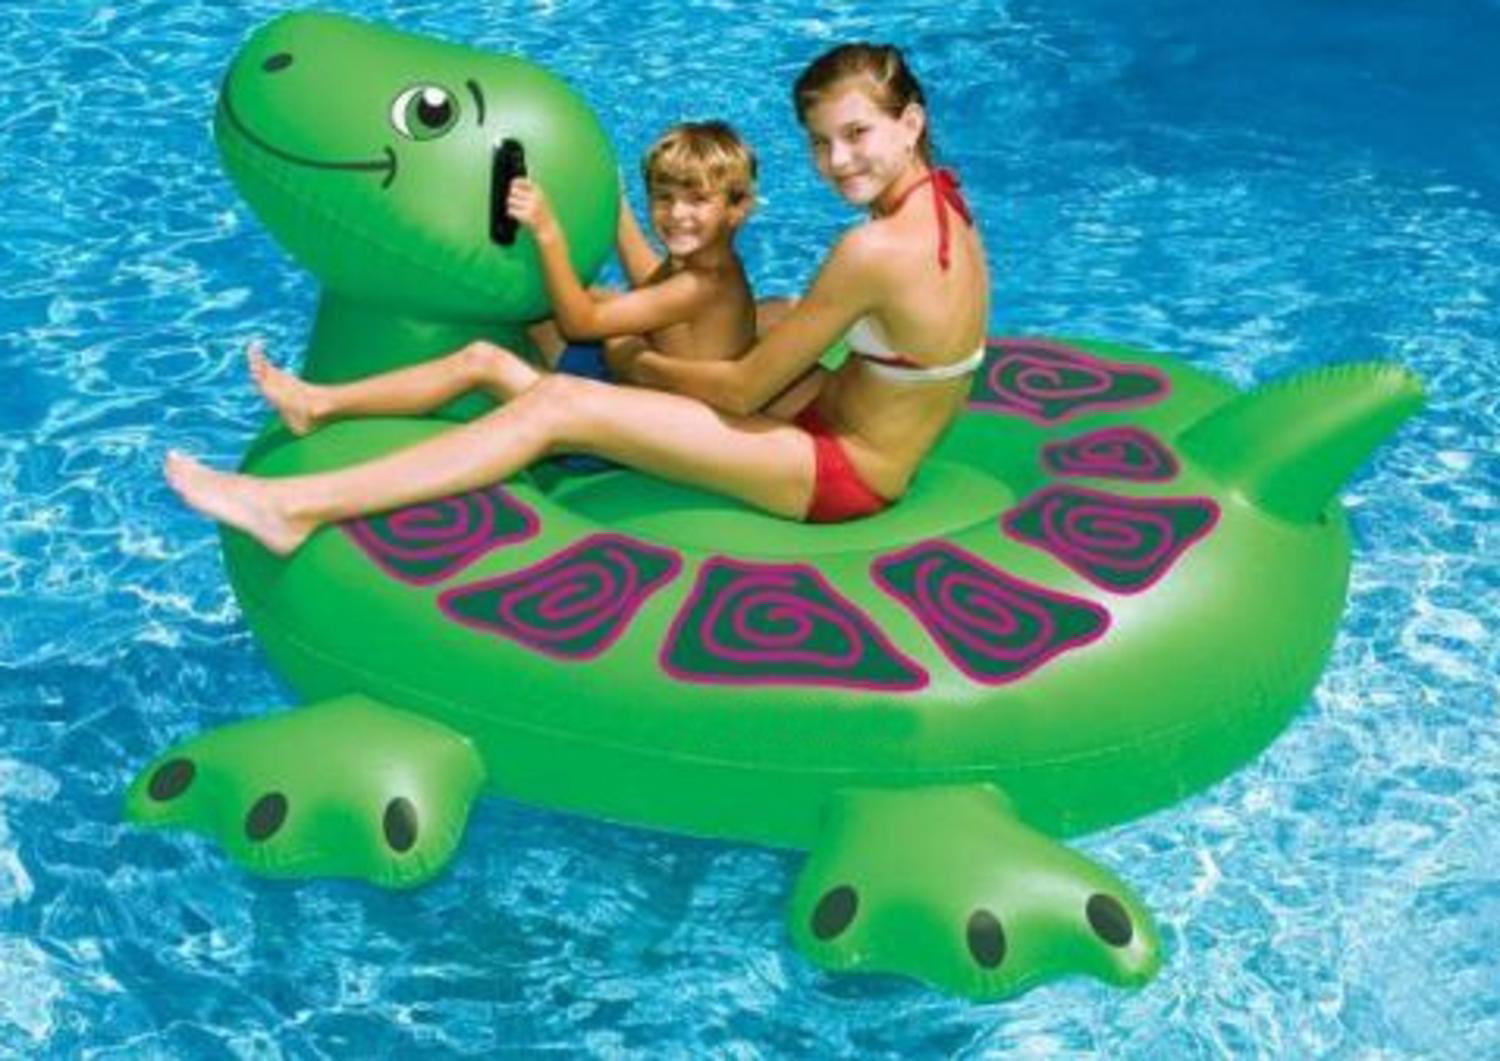 Details about   Intex PBR Inflatabull Bull-Riding Giant Inflatable Swimming Pool Lake Fun Float 